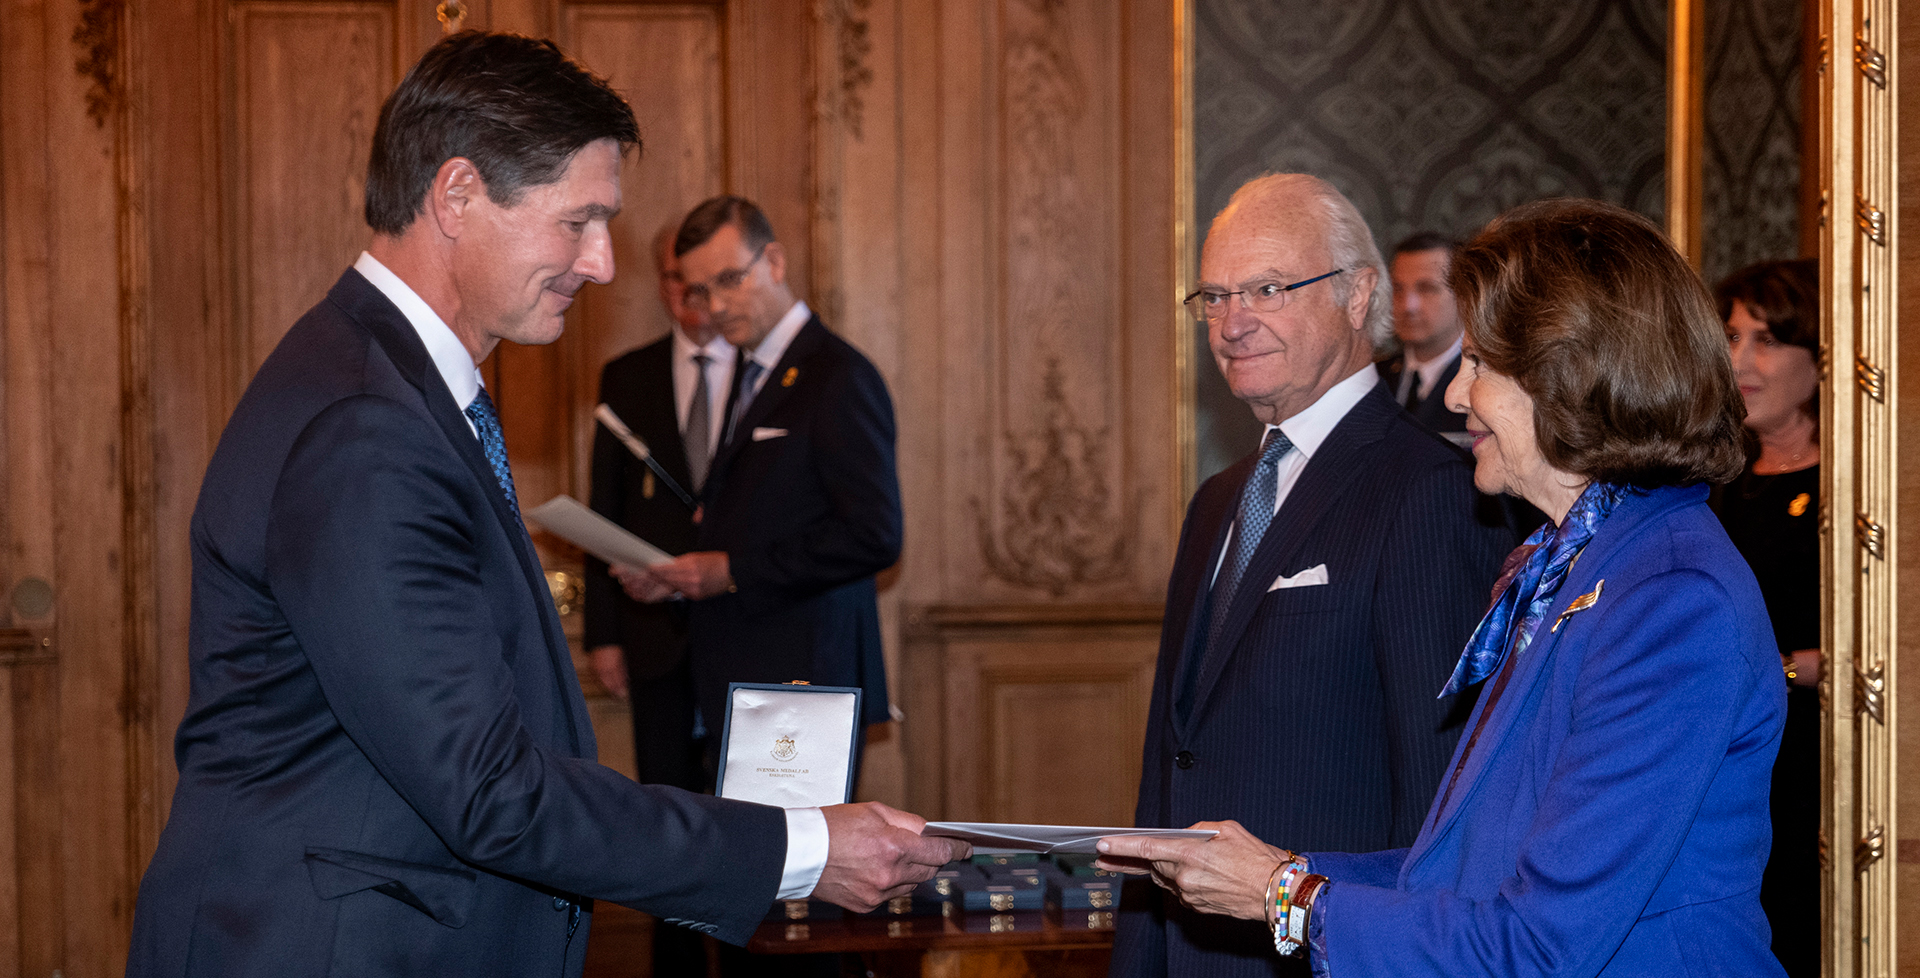 Engcon’s founder Stig Engström receives a medal from H.M. The King of Sweden at the Royal Palace of Stockholm